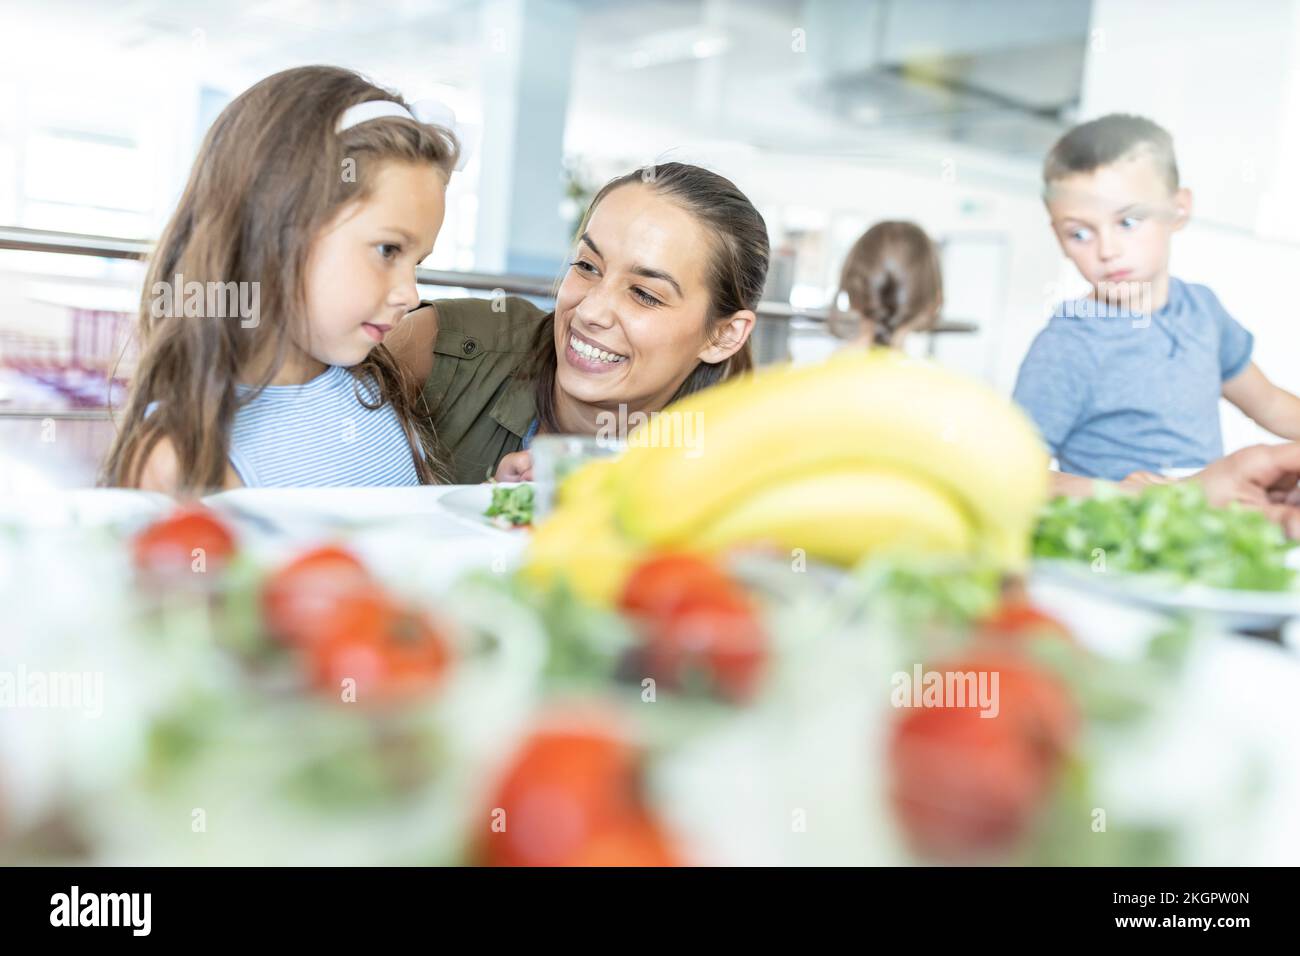 Happy teacher looking at student in school cafeteria Stock Photo